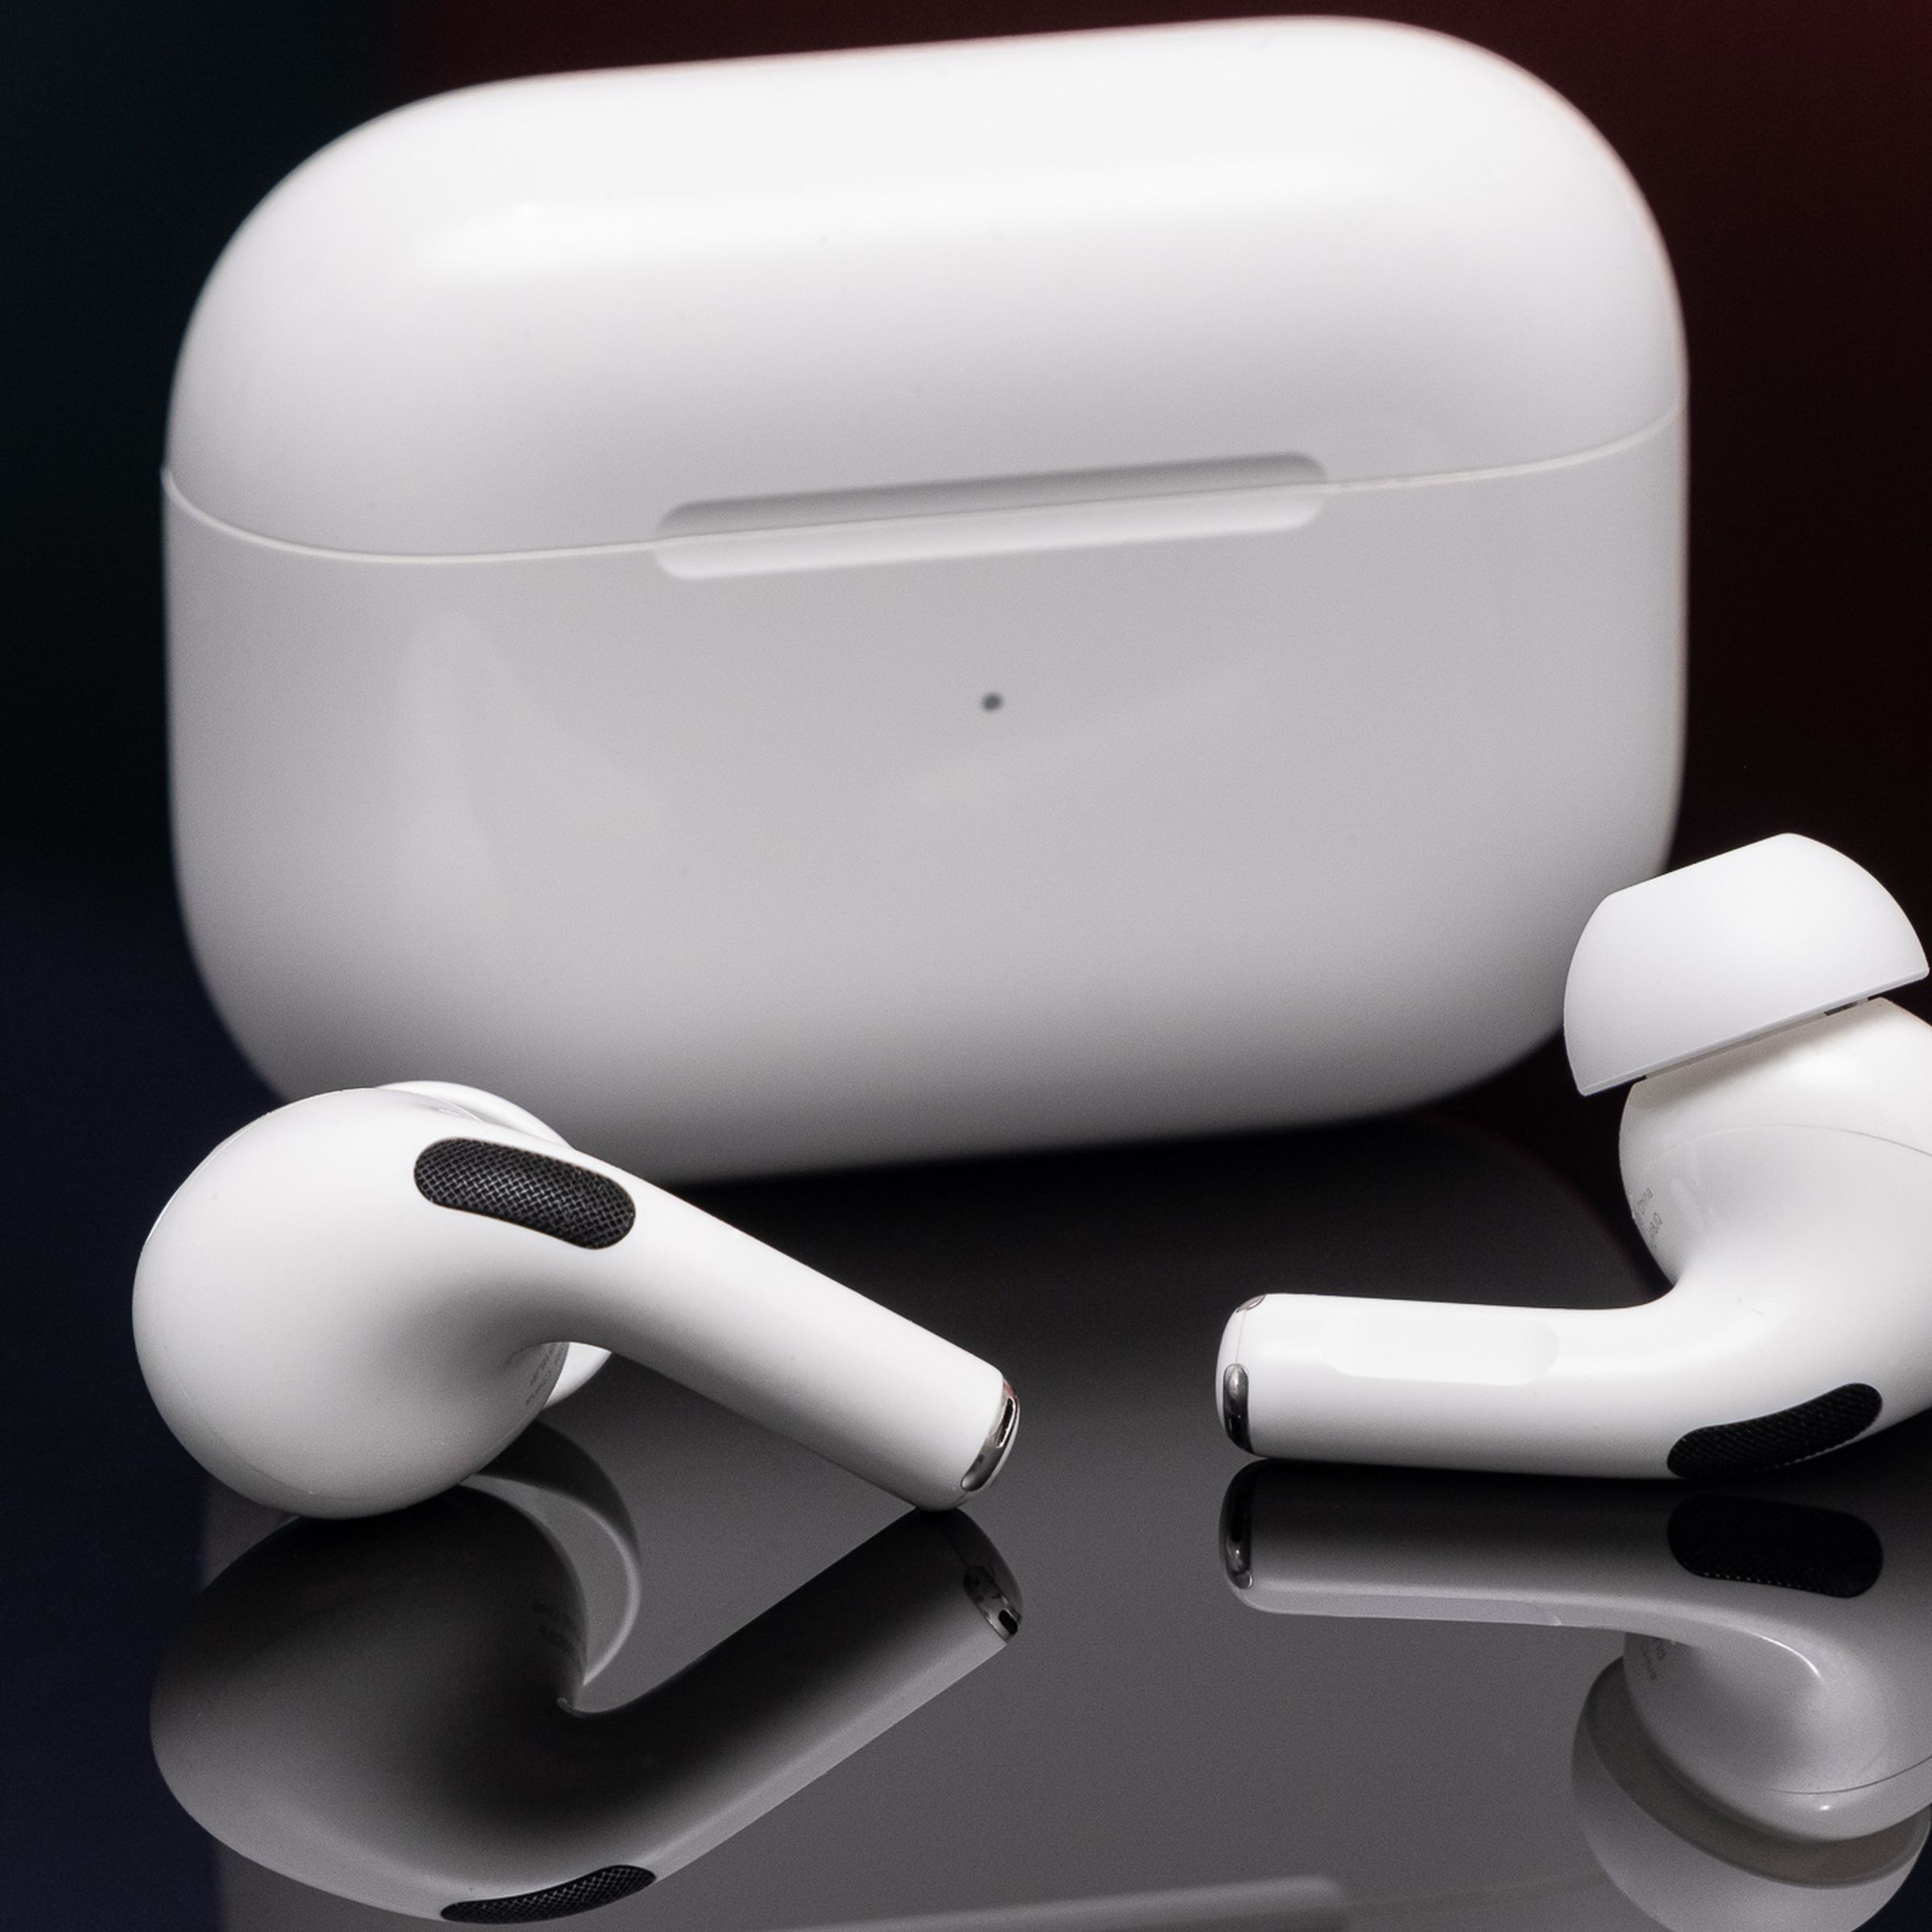 Apple’s second-generation AirPods Pro photographed on a reflective black surface.